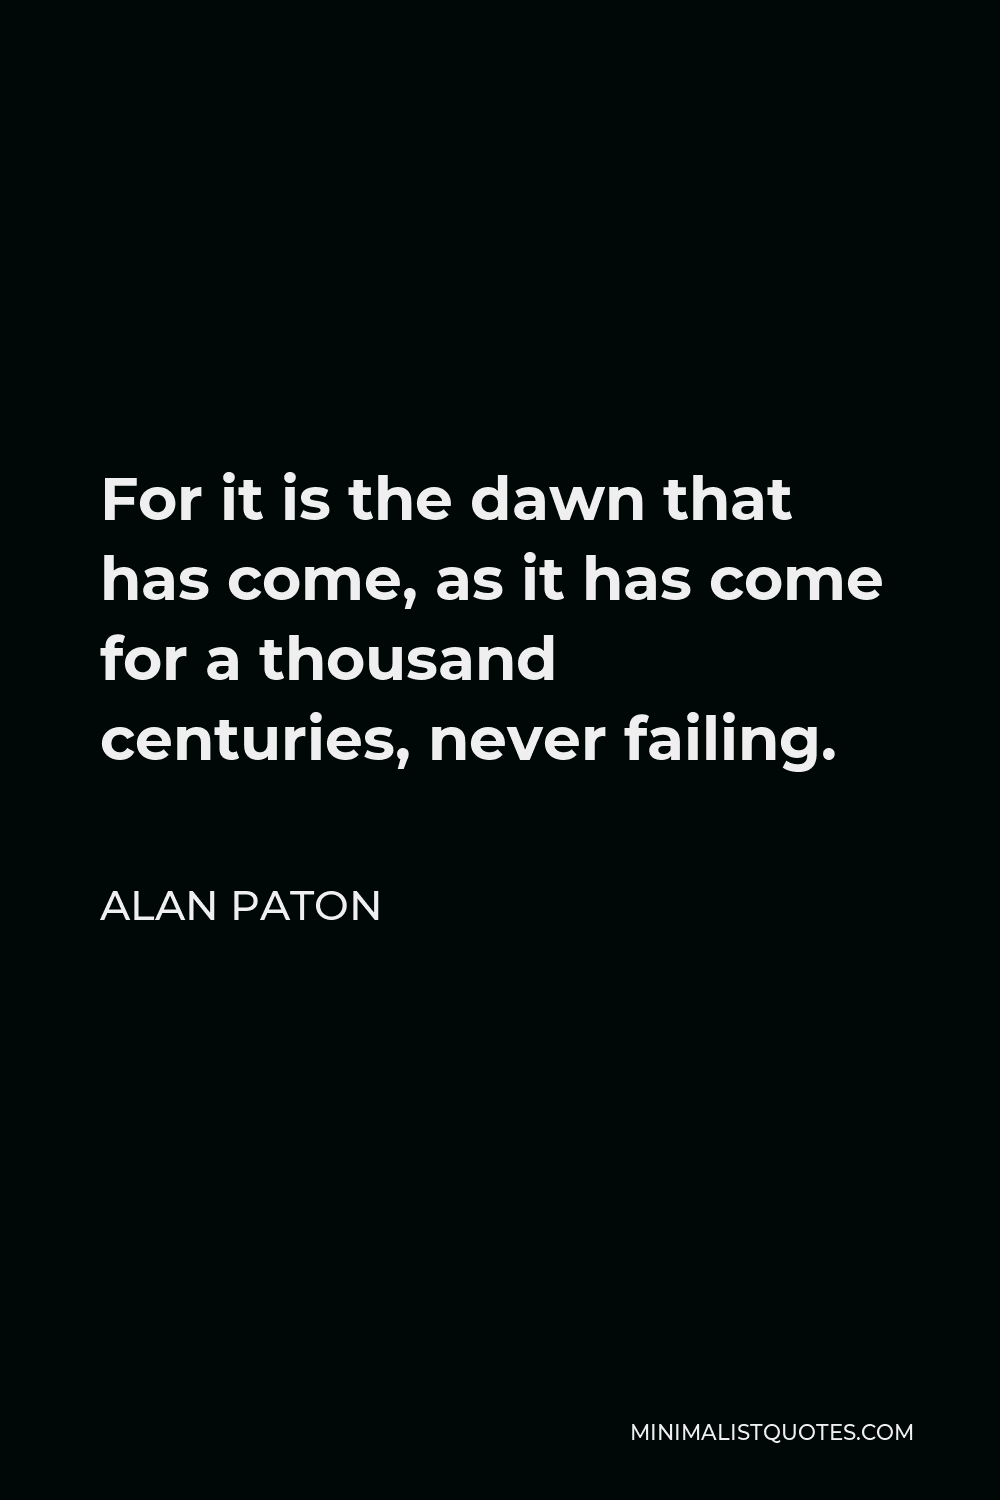 Alan Paton Quote - For it is the dawn that has come, as it has come for a thousand centuries, never failing.